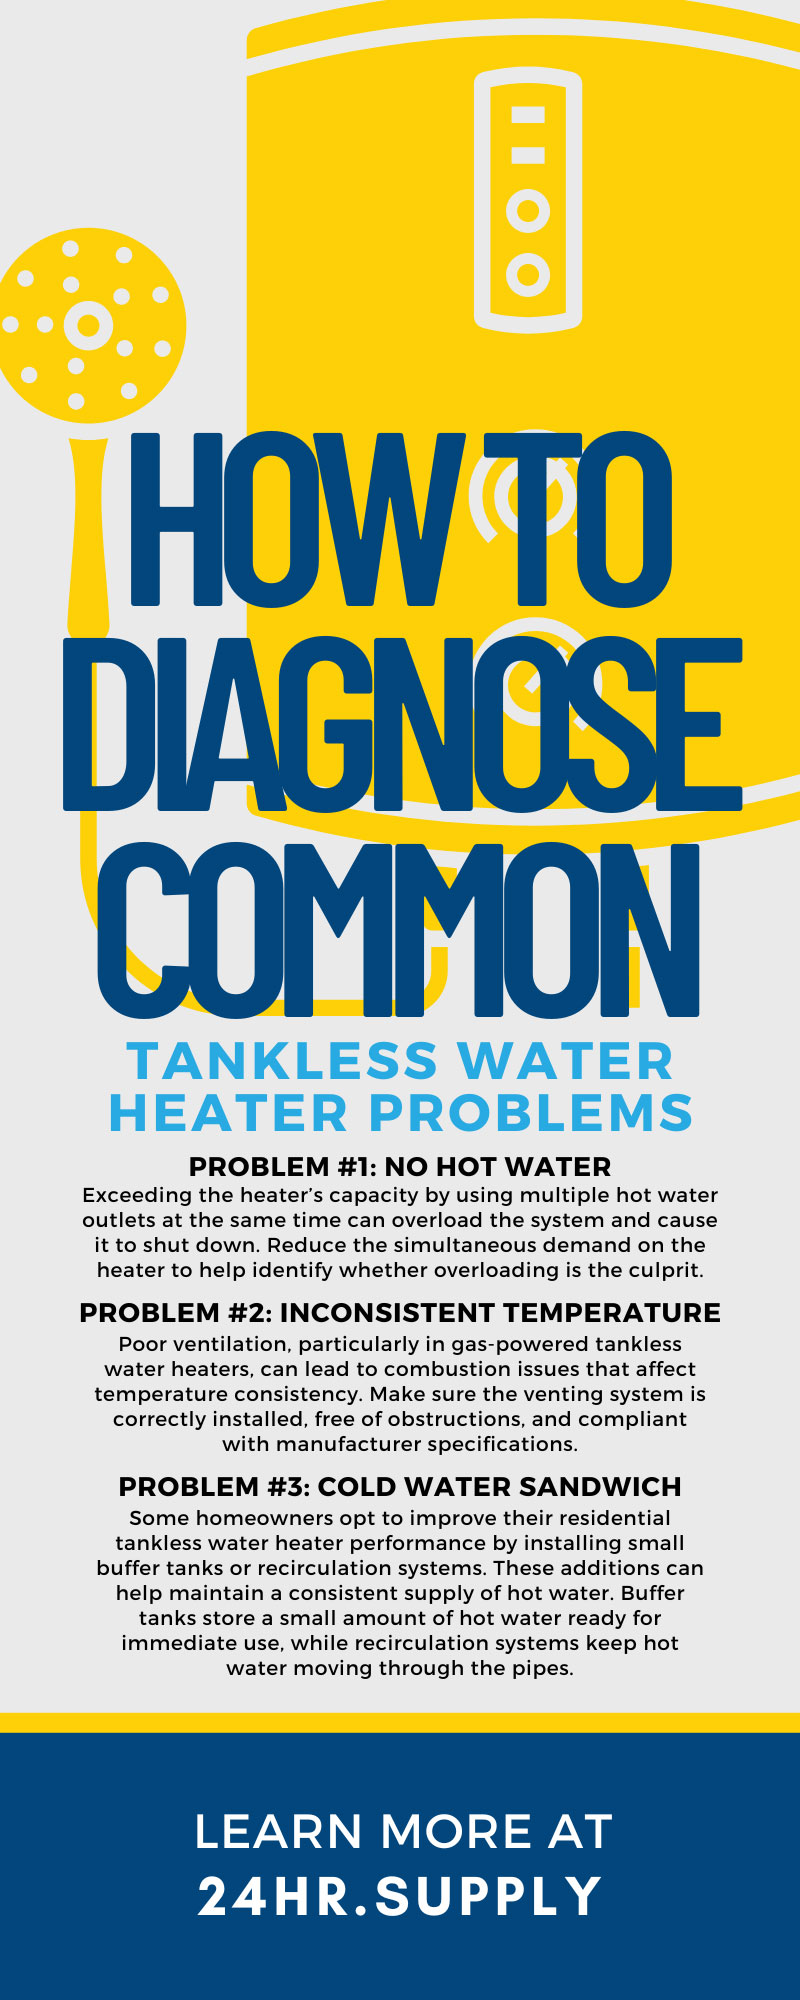 How To Diagnose Common Tankless Water Heater Problems